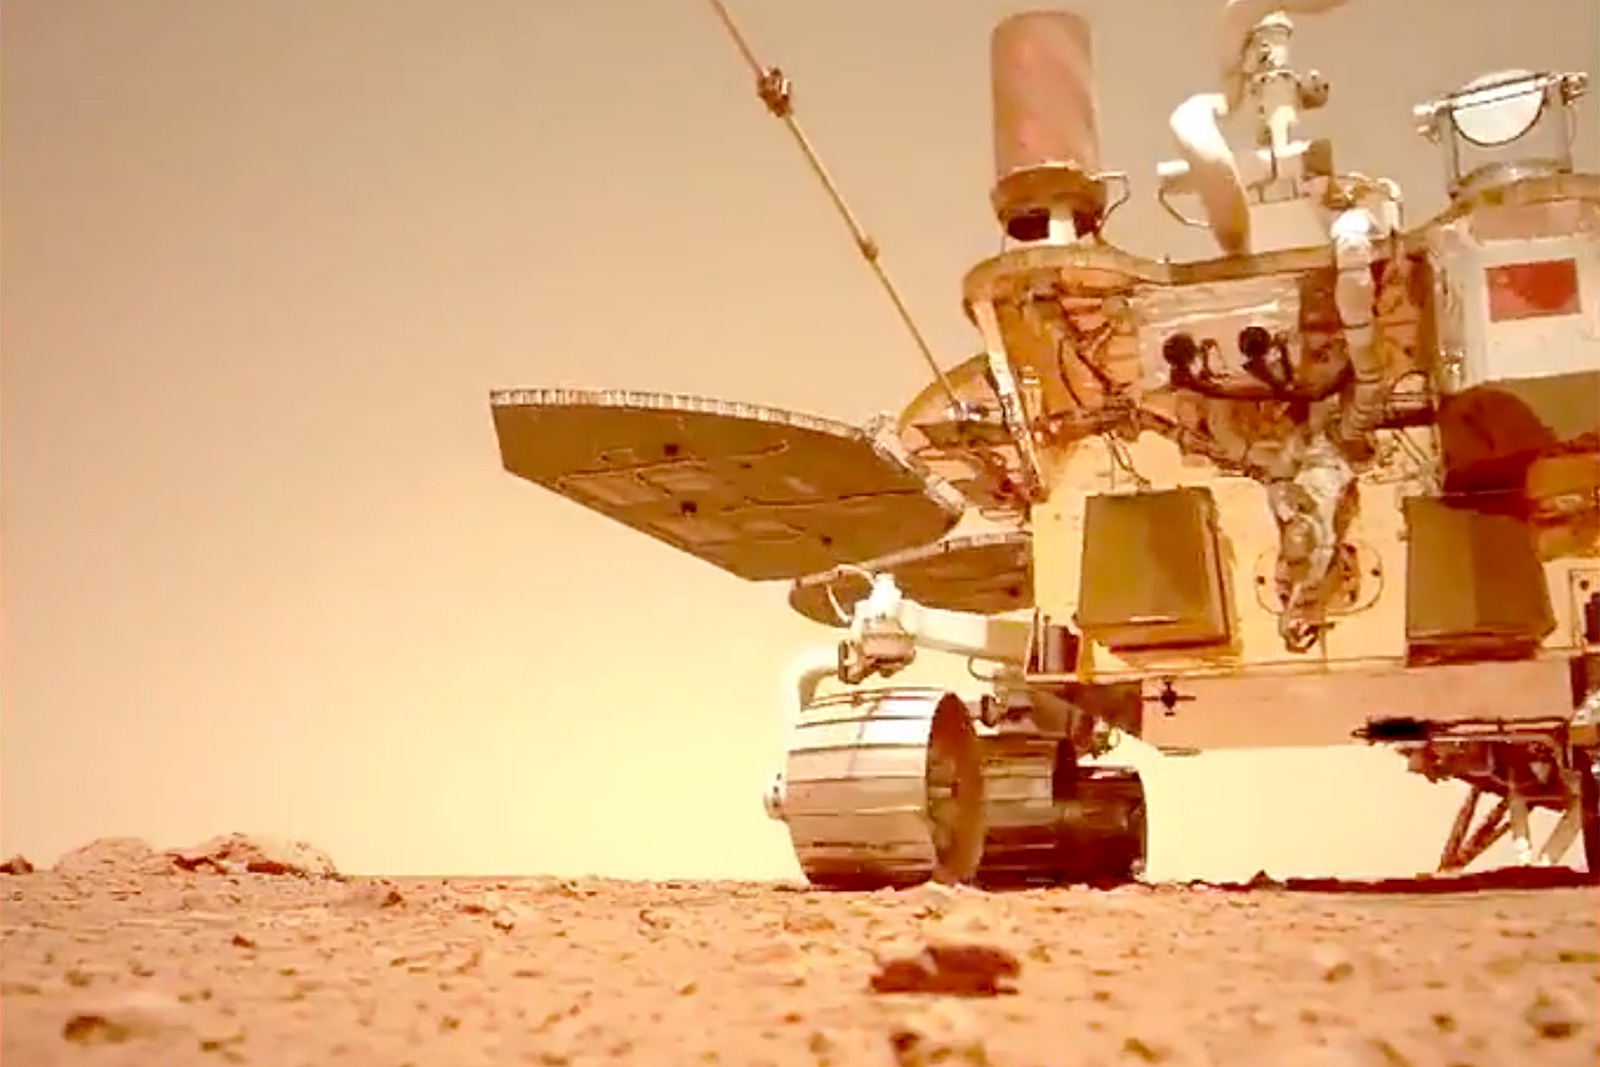 China shares video and audio clips from its rover on Mars